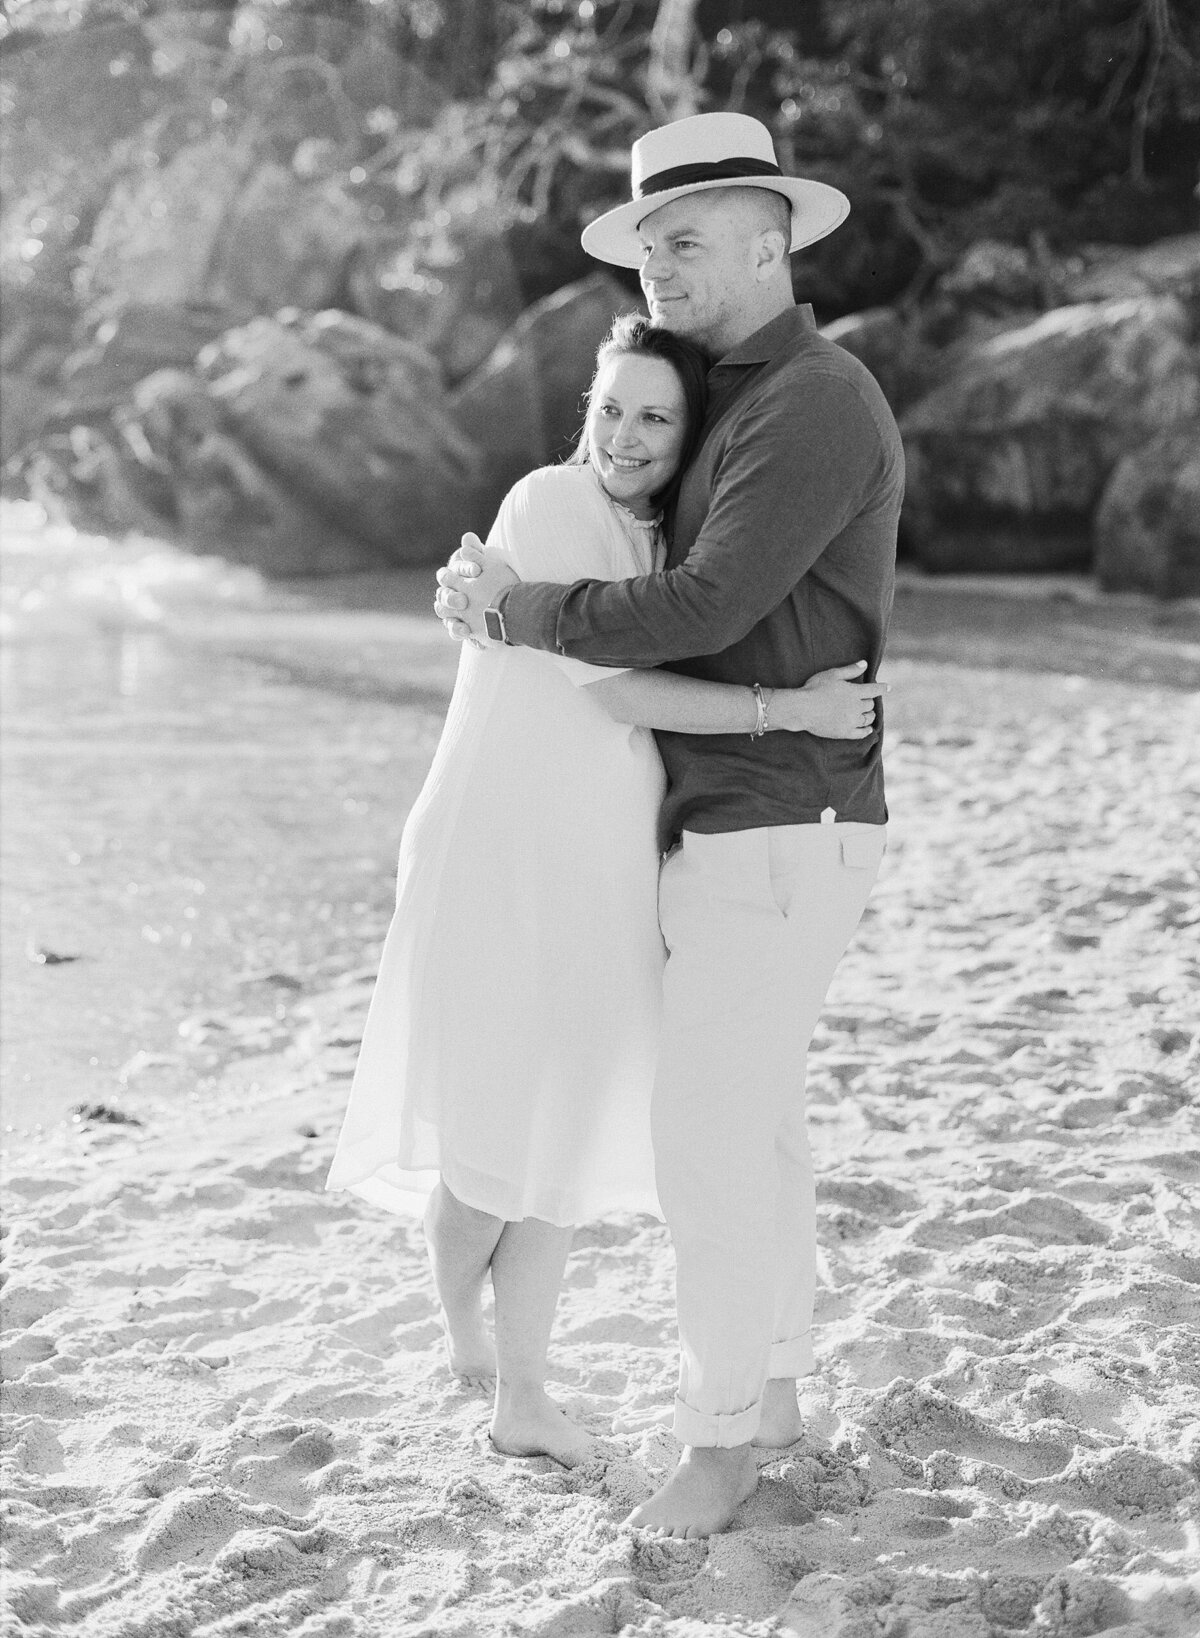 Manly engagement + maternity session